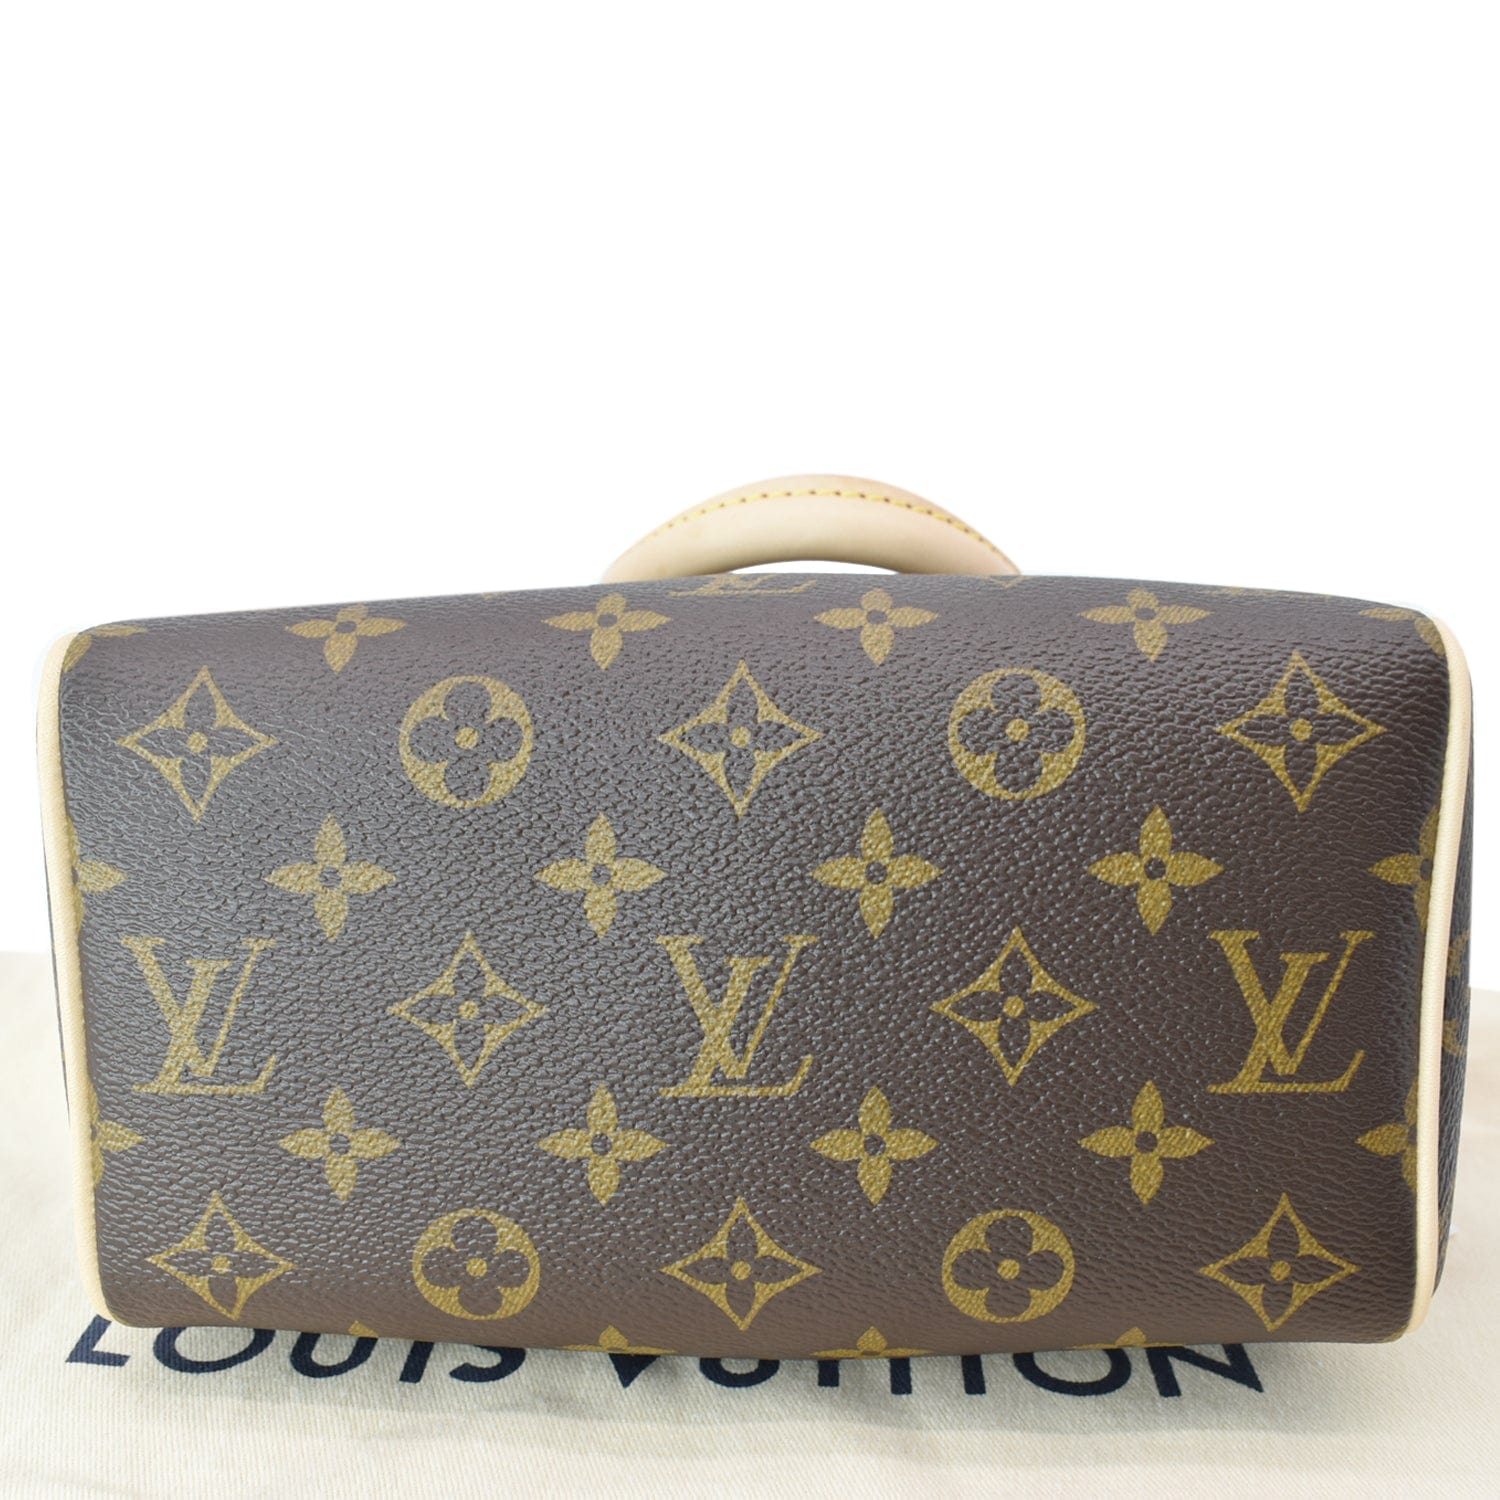 Louis Vuitton Speedy Bandoulier 20 Crossbody – My Bag Obsession